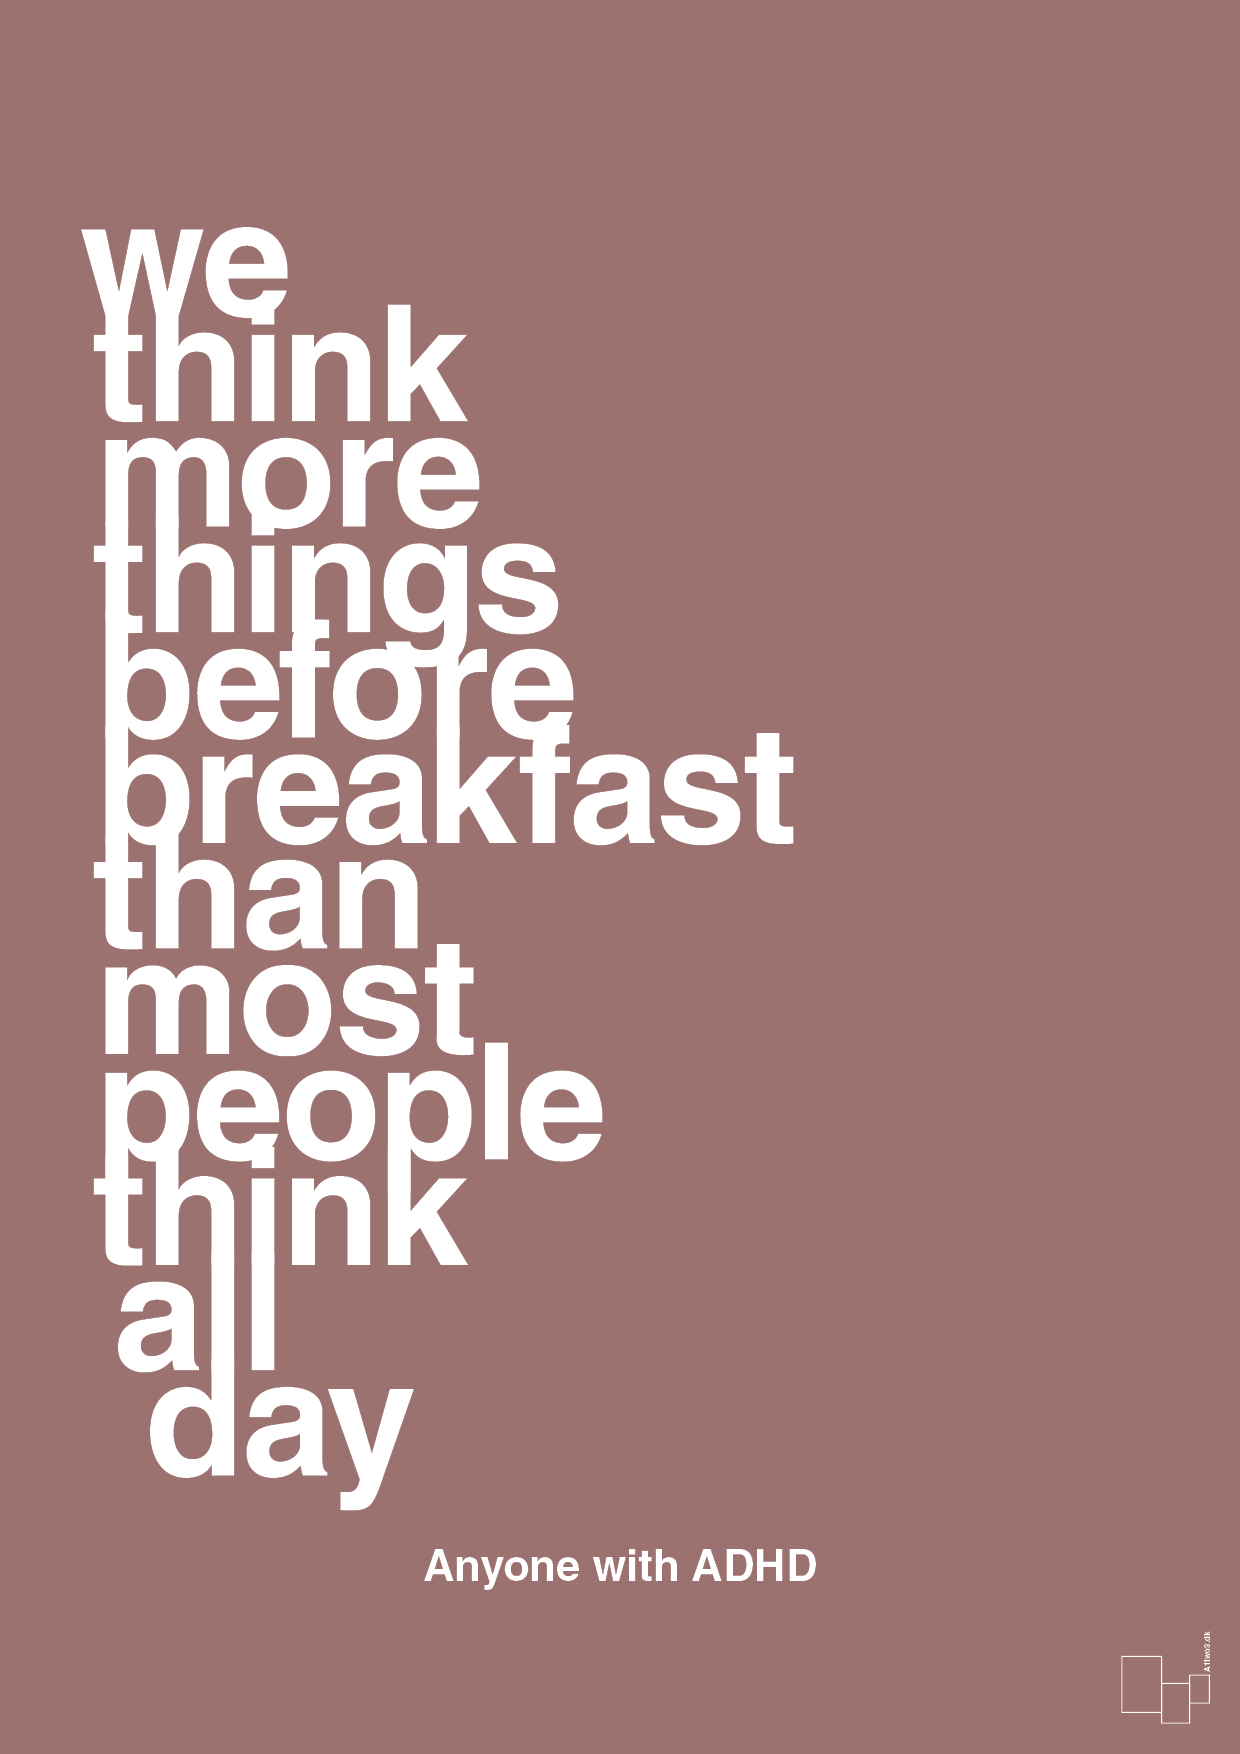 we think more things before breakfast than most people think all day - Plakat med Samfund i Plum